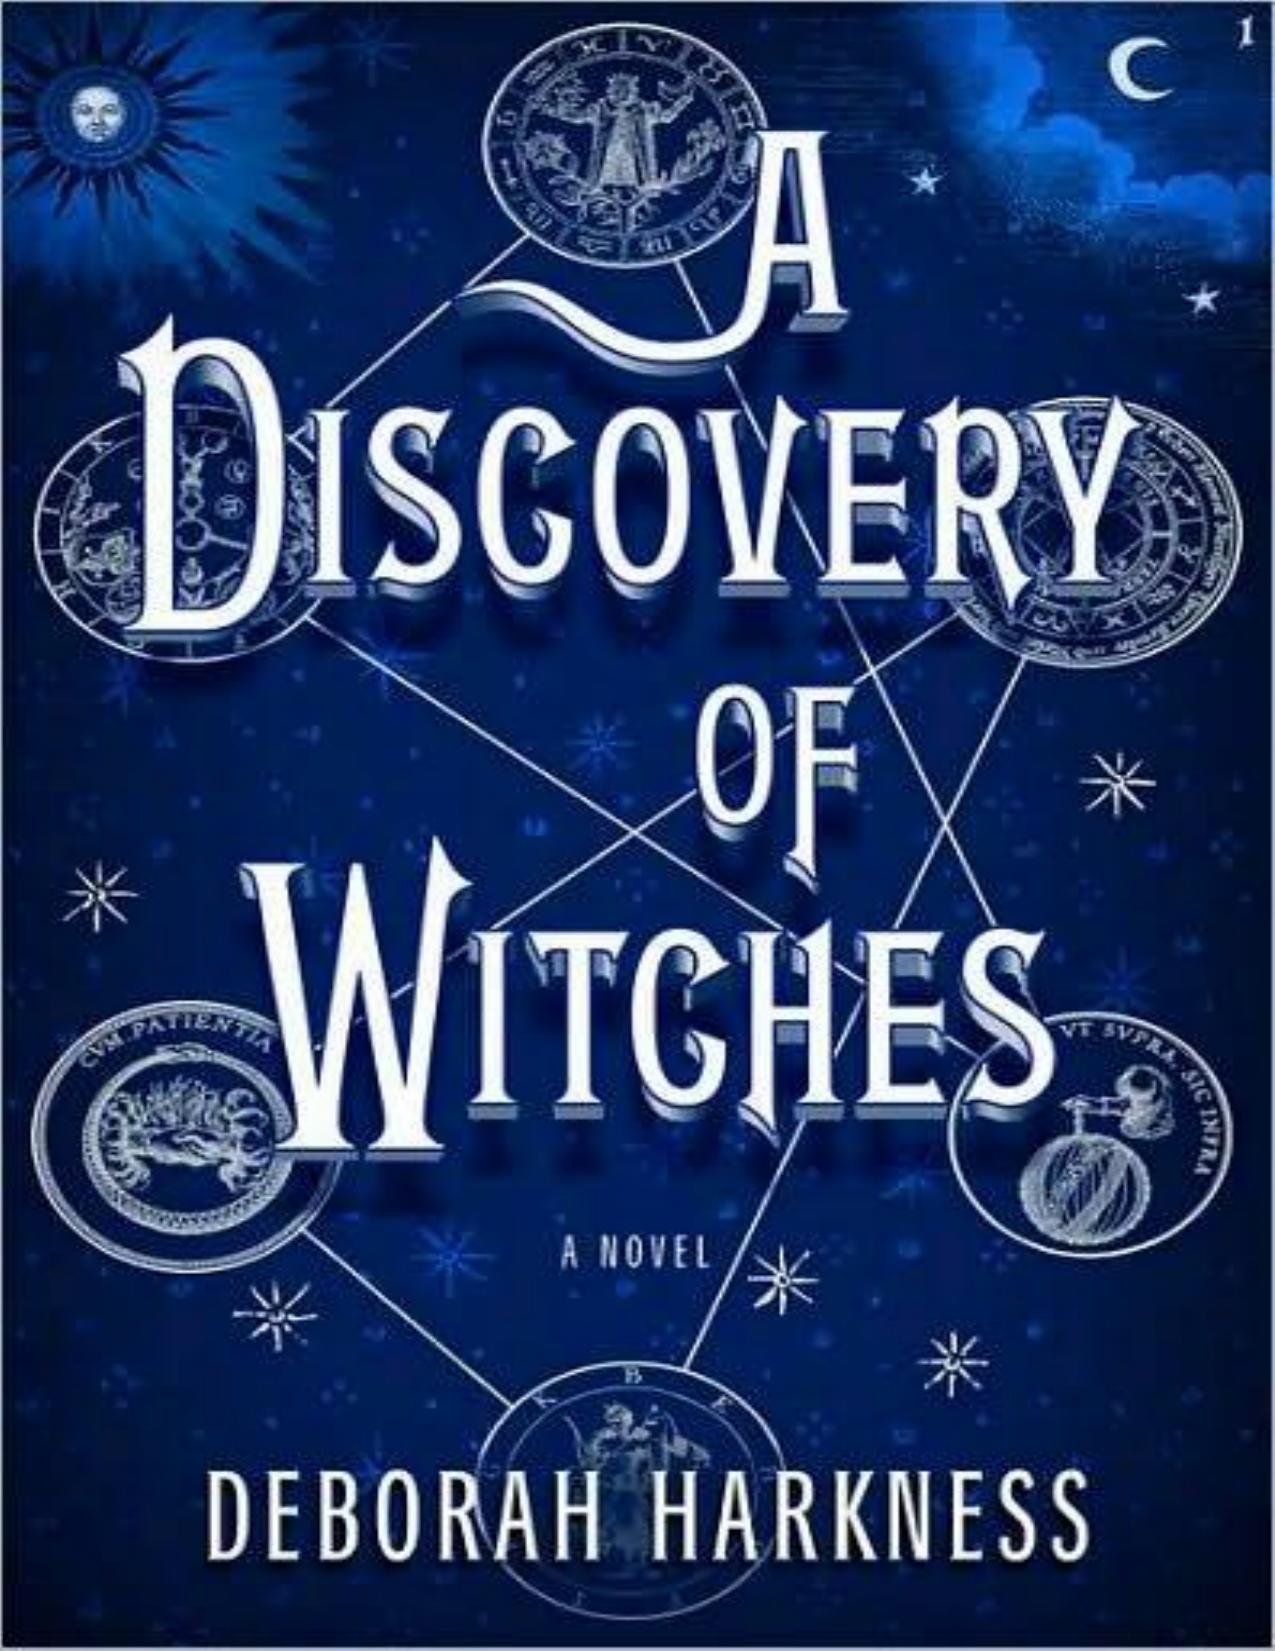 A Discovery of Witches: A Novel by Deborah Harkness